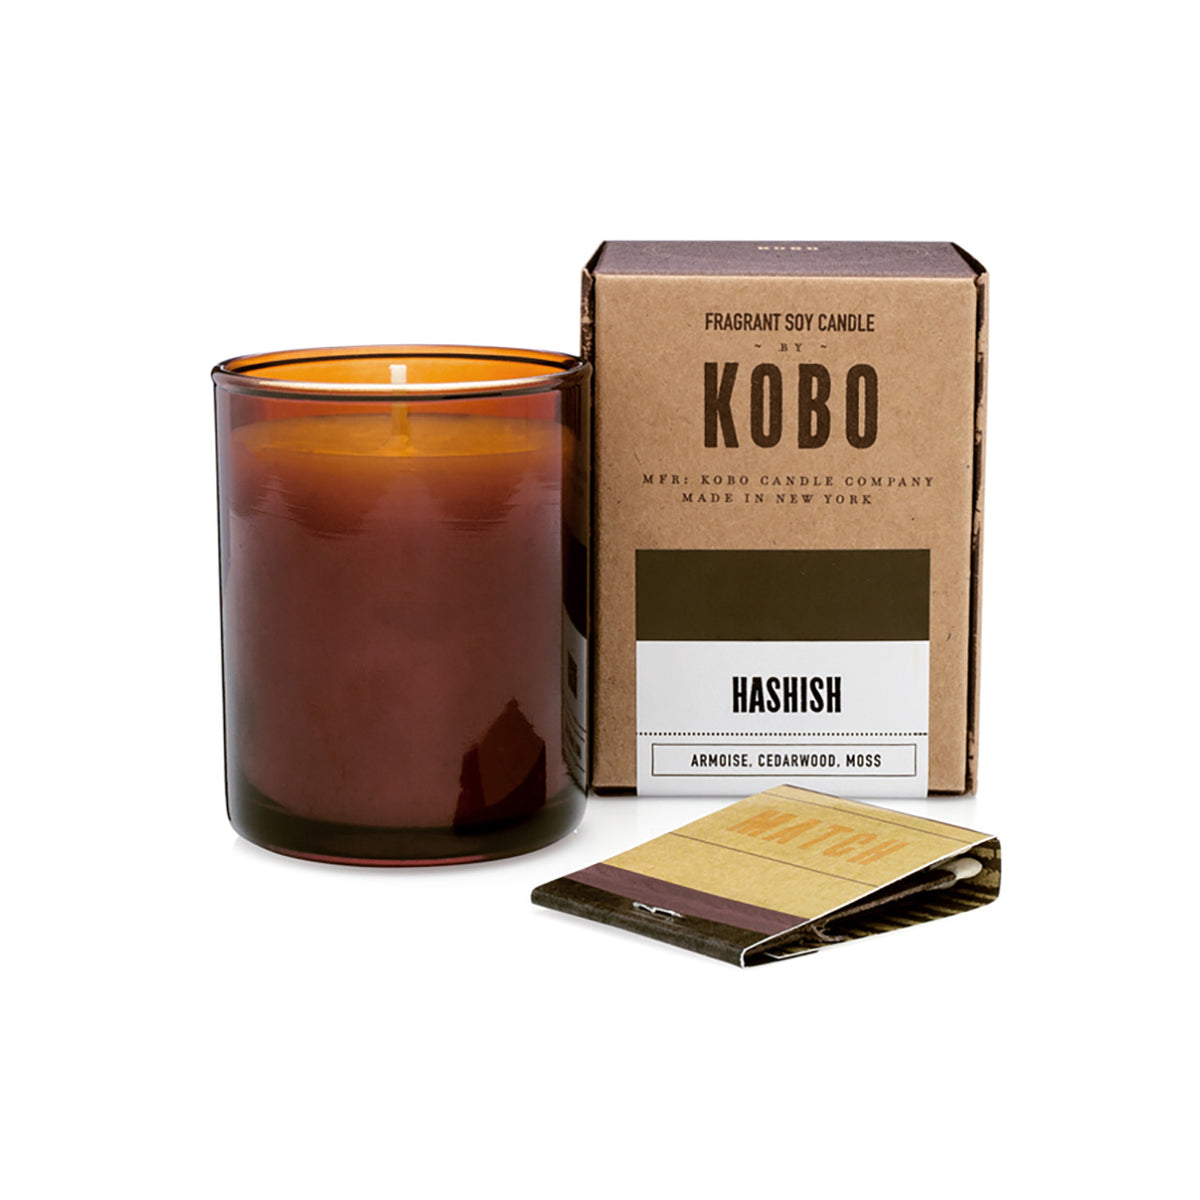 Kobo Pure Soy votive candle in an amber glass jar with ceramic matches and kraft box. h*shish scented 